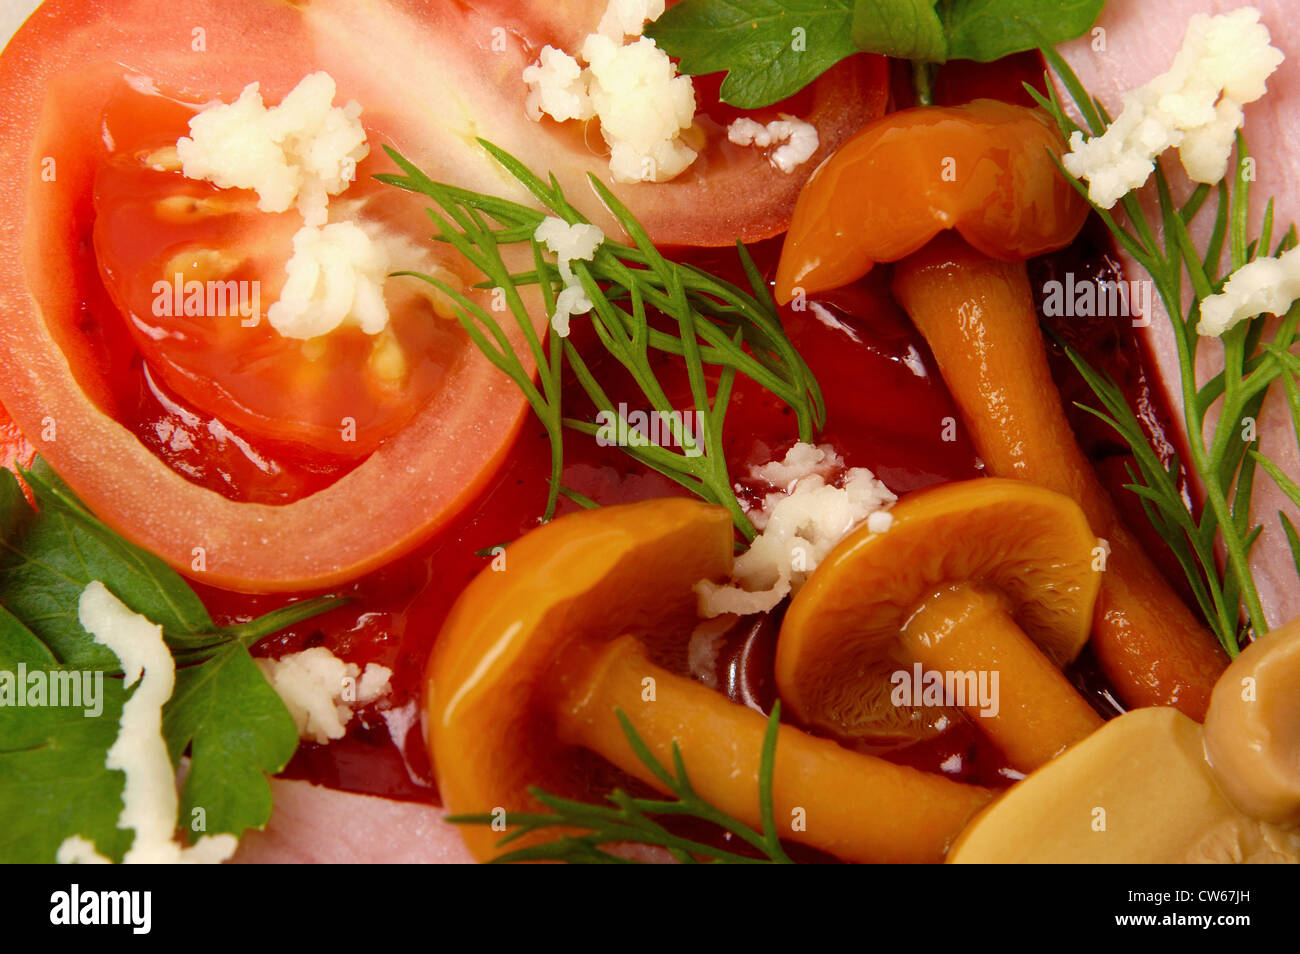 mushrooms, ham and tomatoes covering pizza Stock Photo